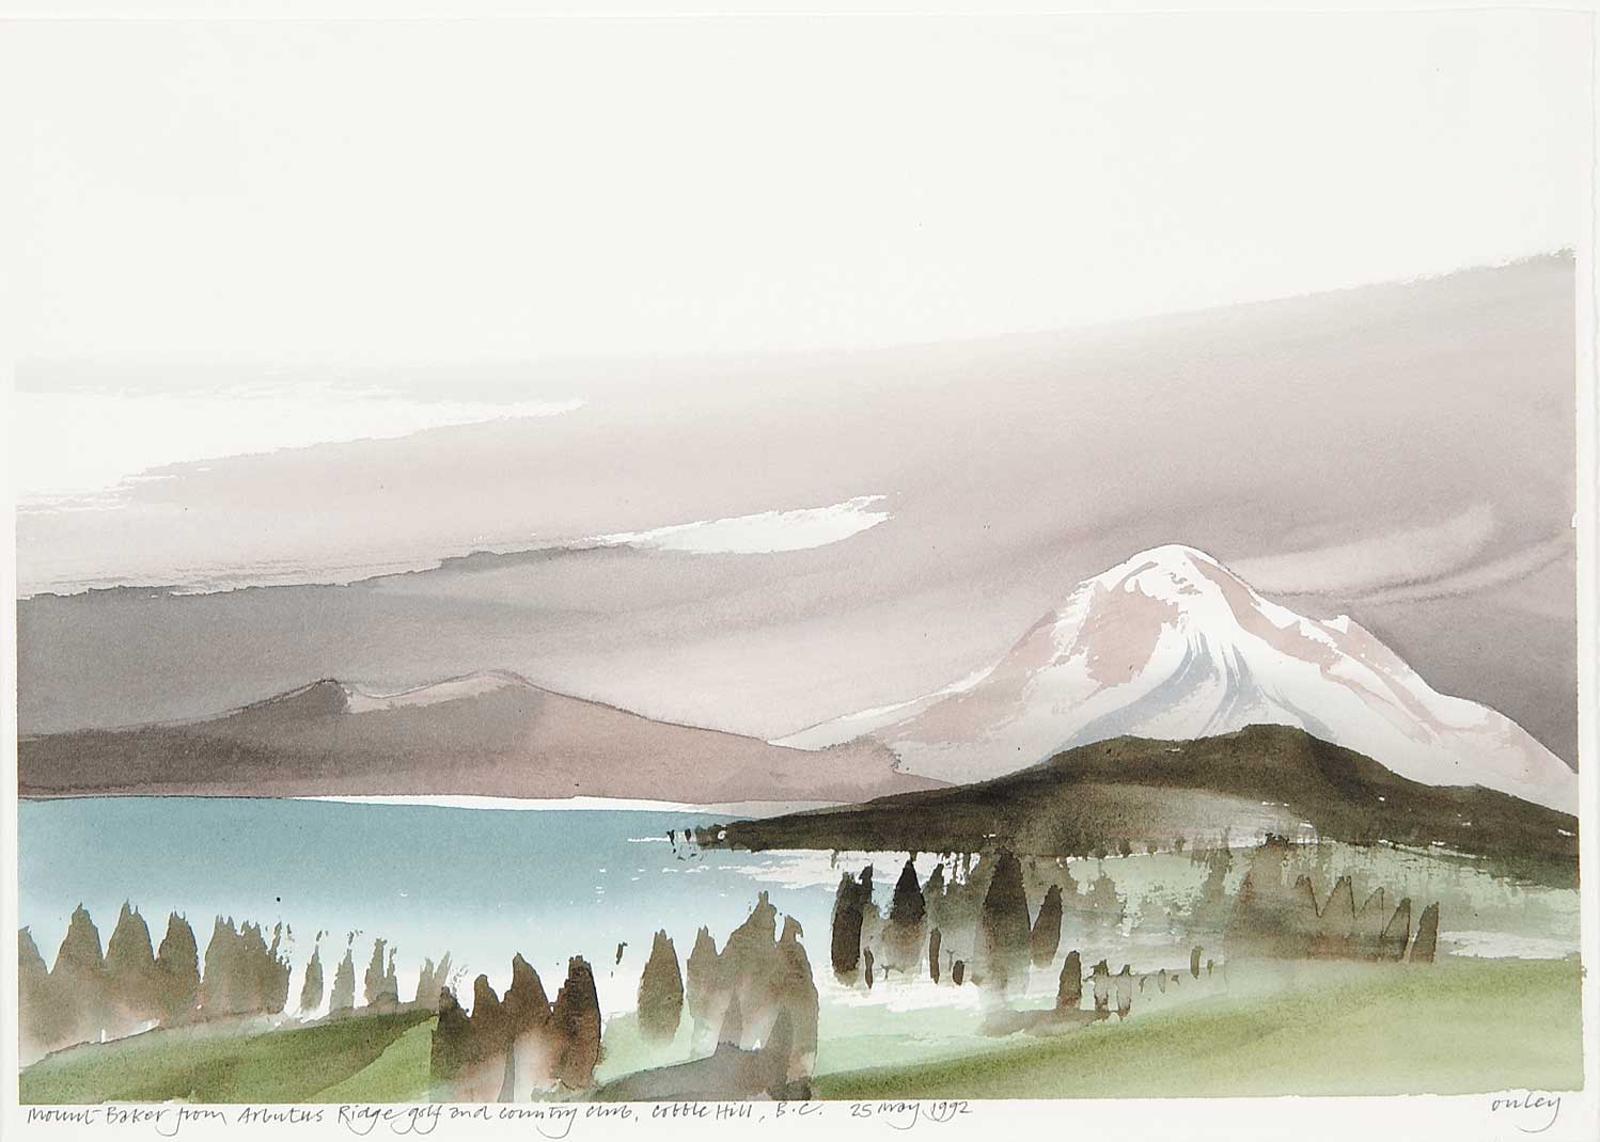 Norman Anthony (Toni) Onley (1928-2004) - Mount Baker from Arbutus Ridge Golf and Country Club, Cobble Hill, B.C.